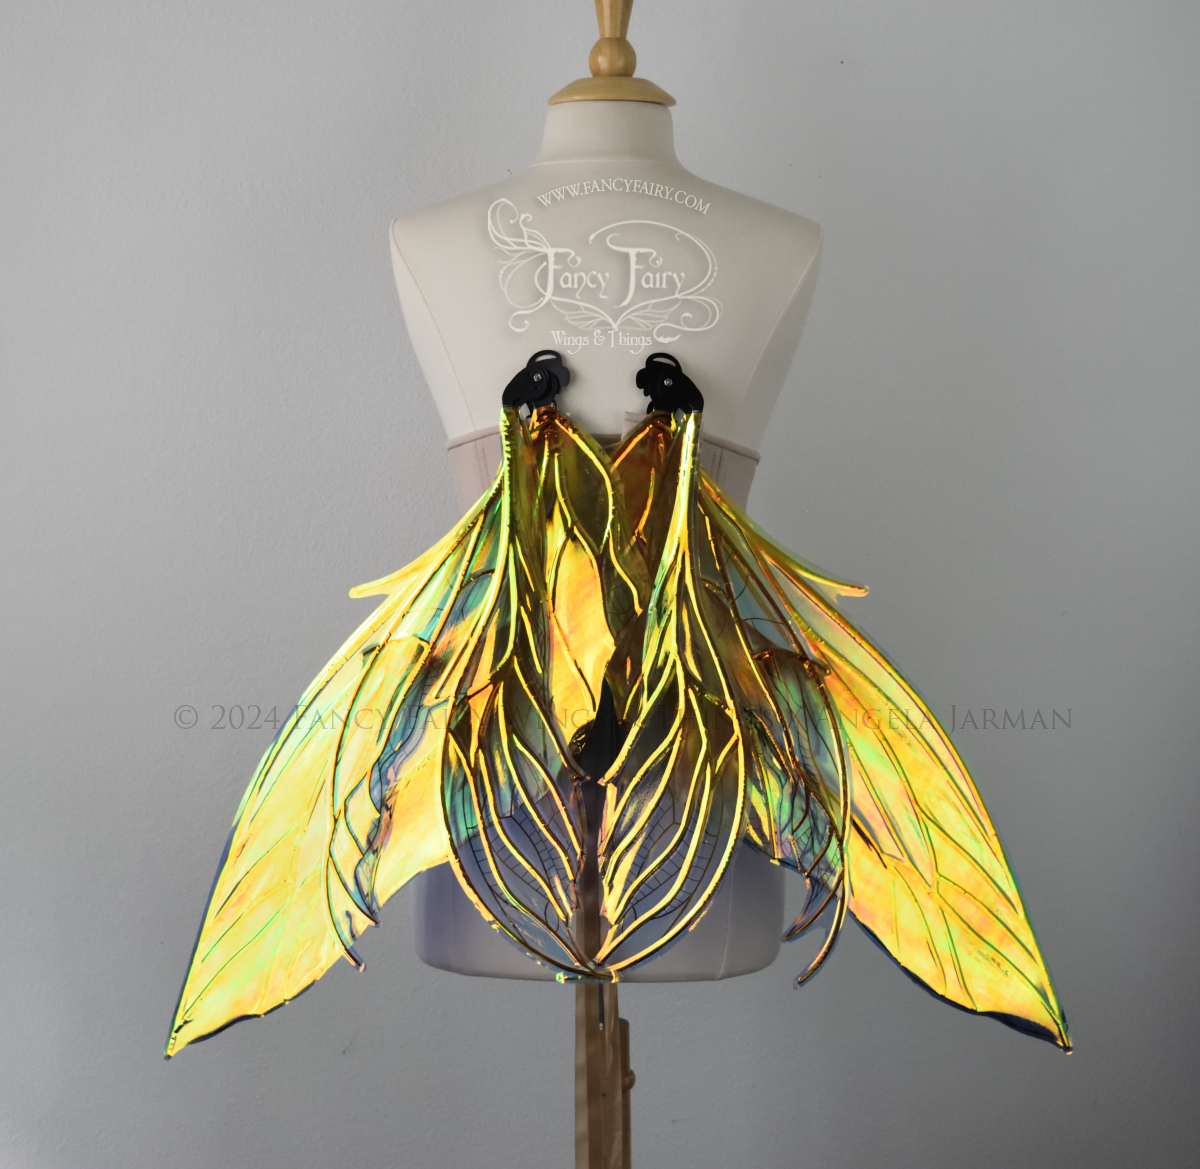 Back view of large green & blue iridescent fairy wings with 3 panels on each side, pointed tips, lots of veins, worn on a dress form, in resting position